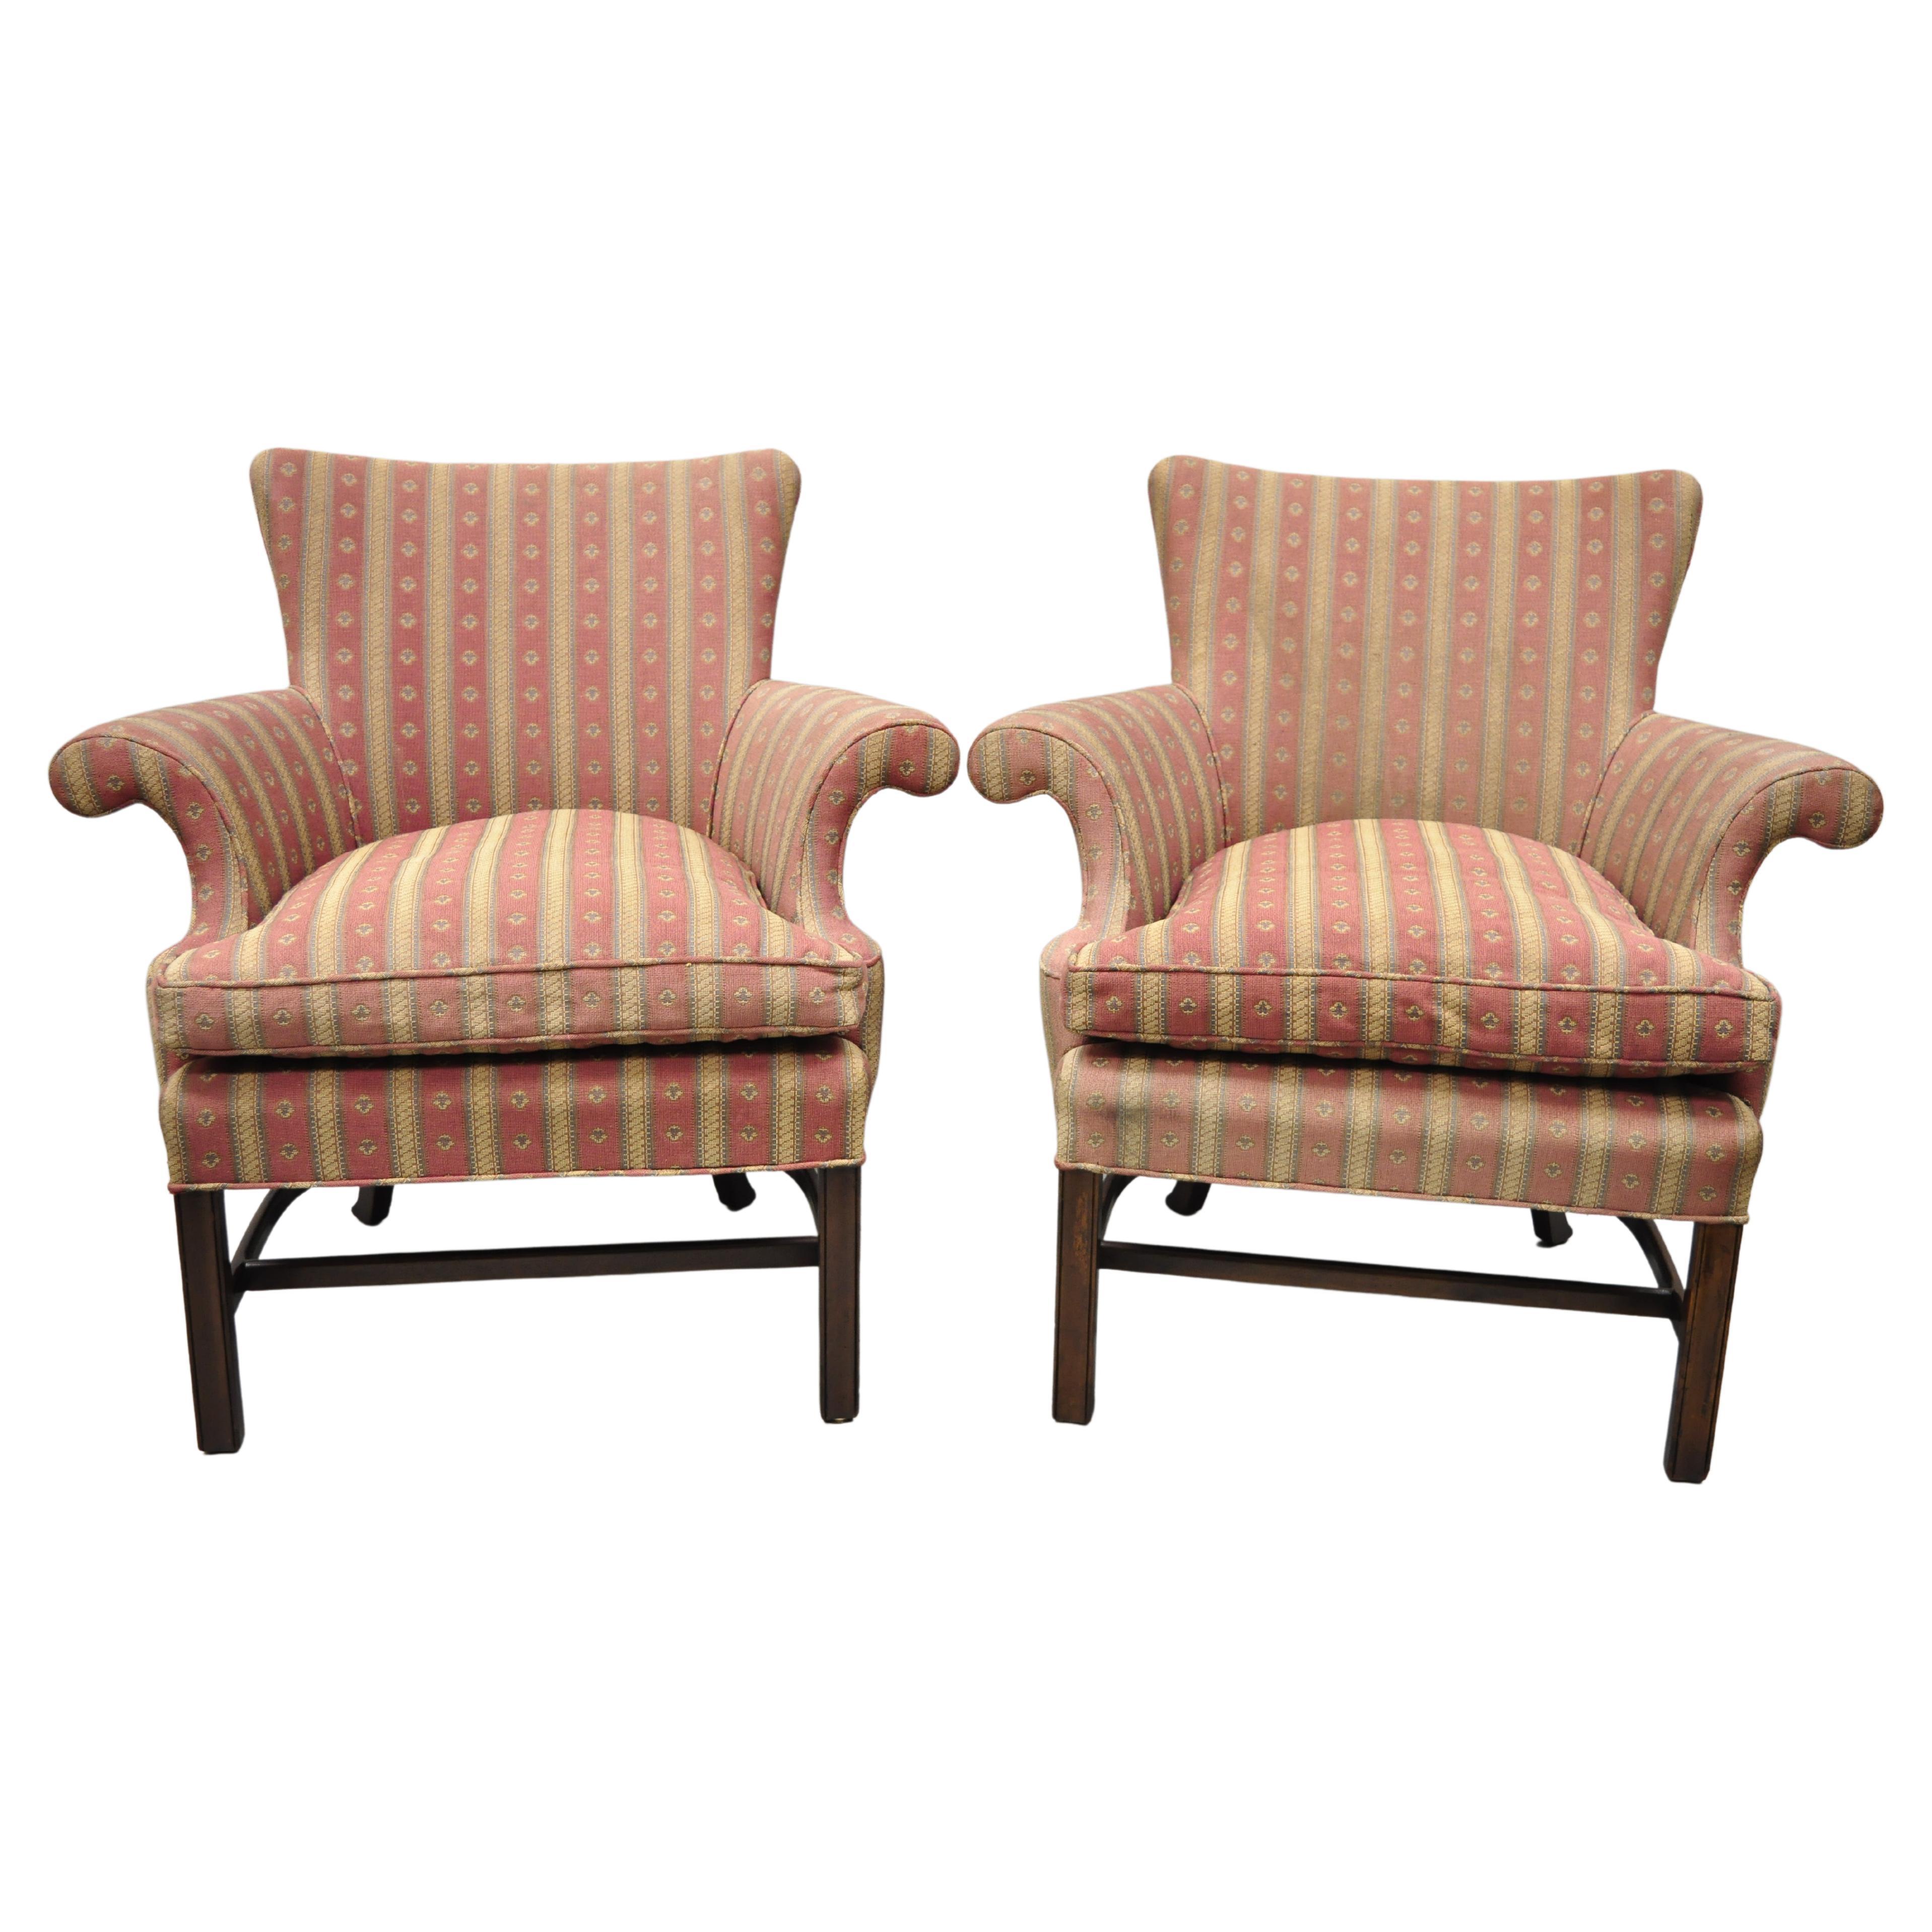 Vintage Southwood Mahogany Upholstered Chippendale Lounge Club Chairs, a Pair